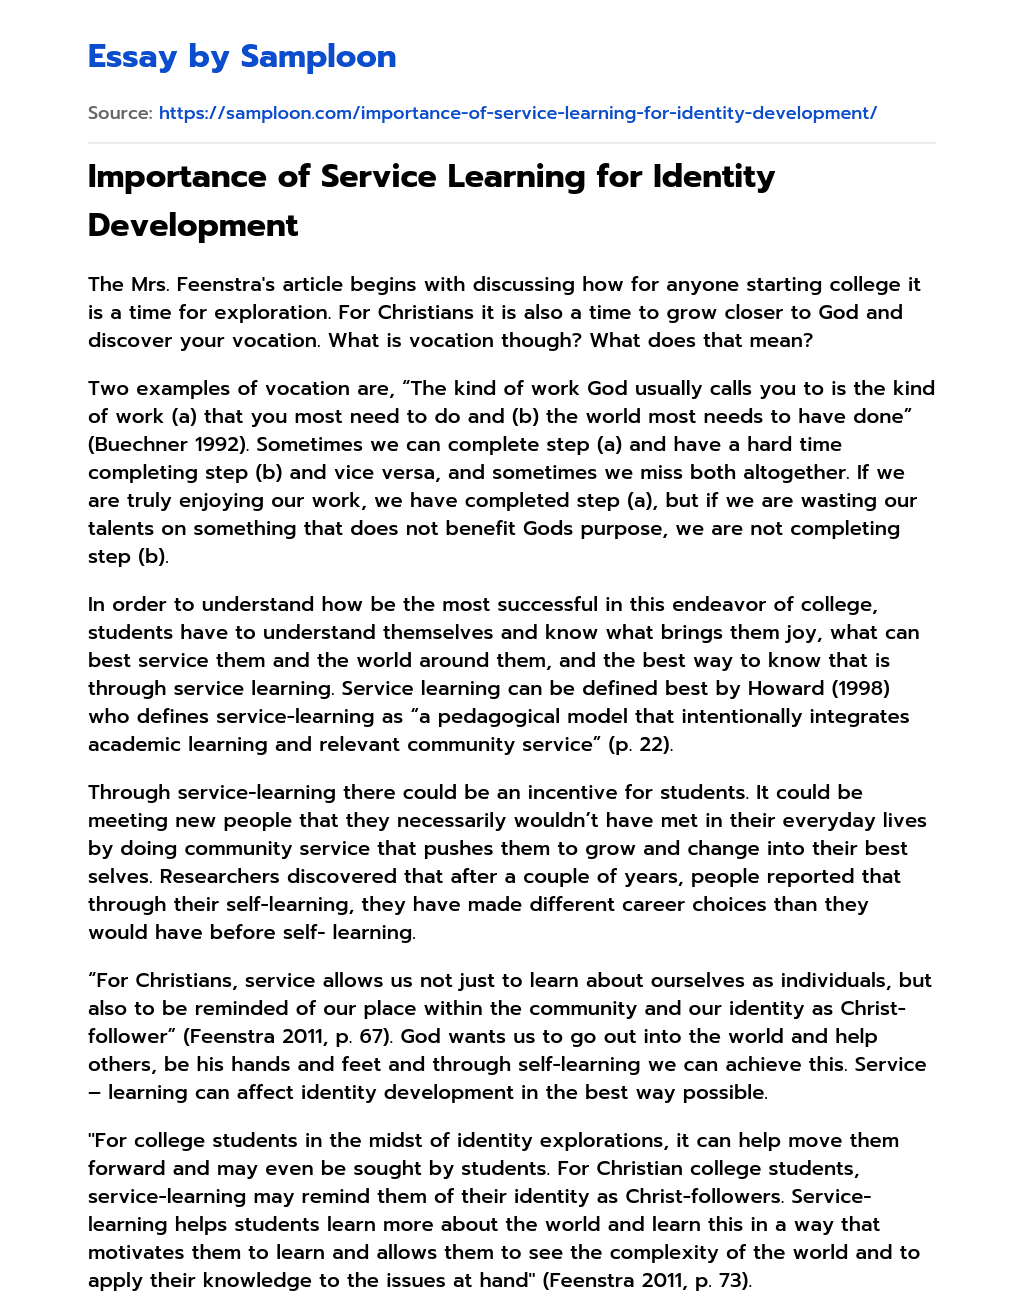 Importance of Service Learning for Identity Development essay